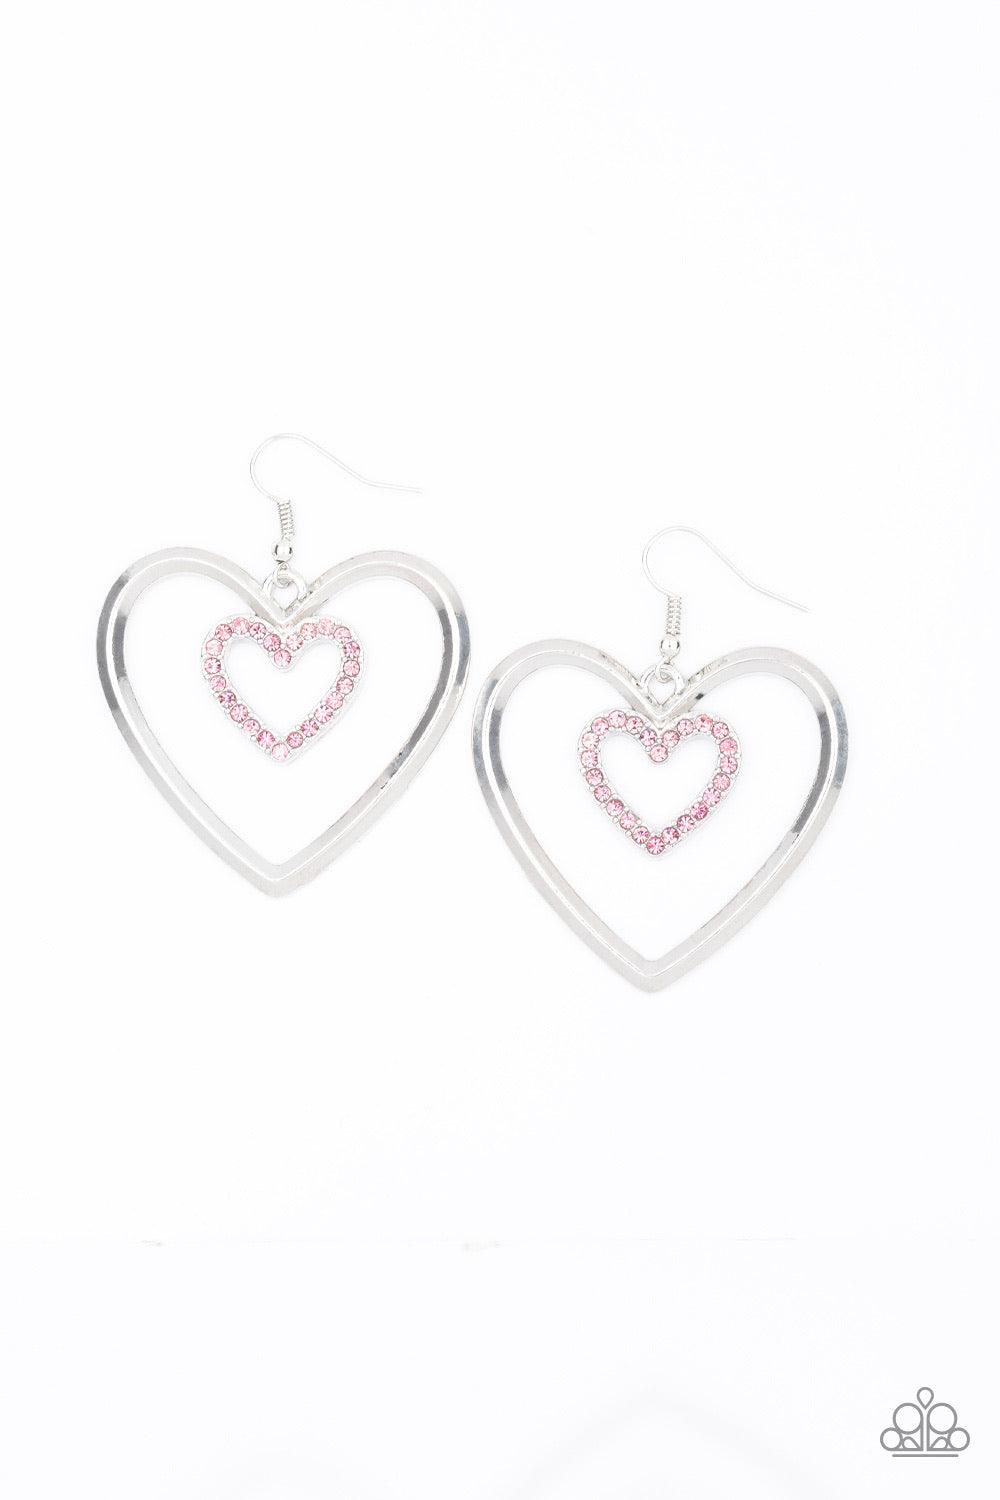 Heart Candy Coture - Beautifully Blinged